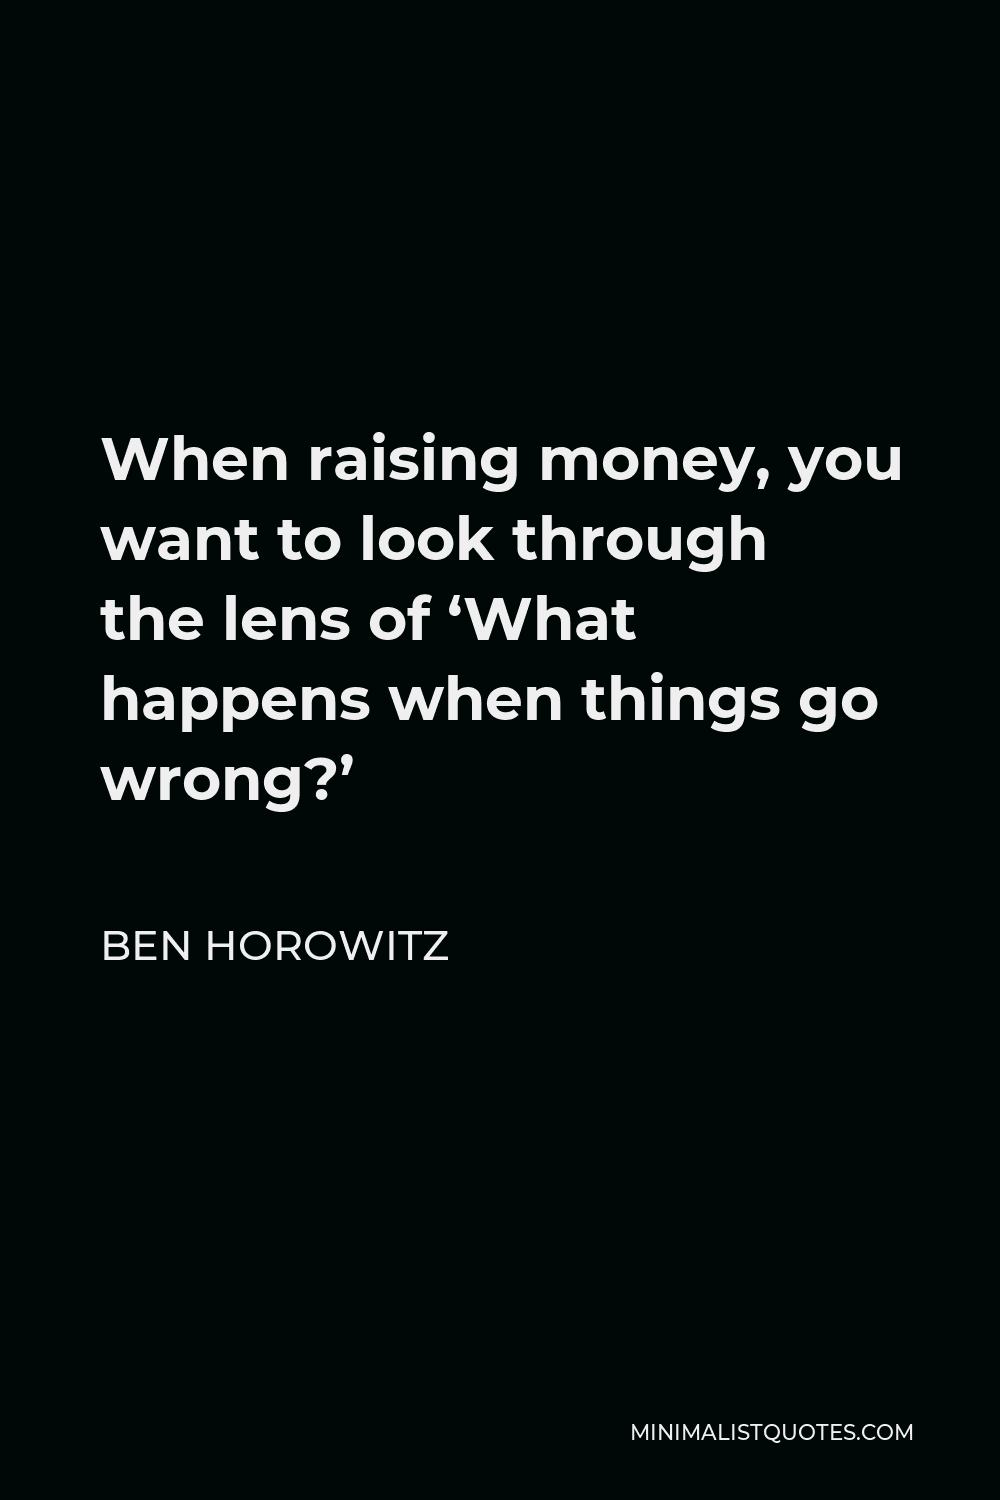 Ben Horowitz Quote - When raising money, you want to look through the lens of ‘What happens when things go wrong?’